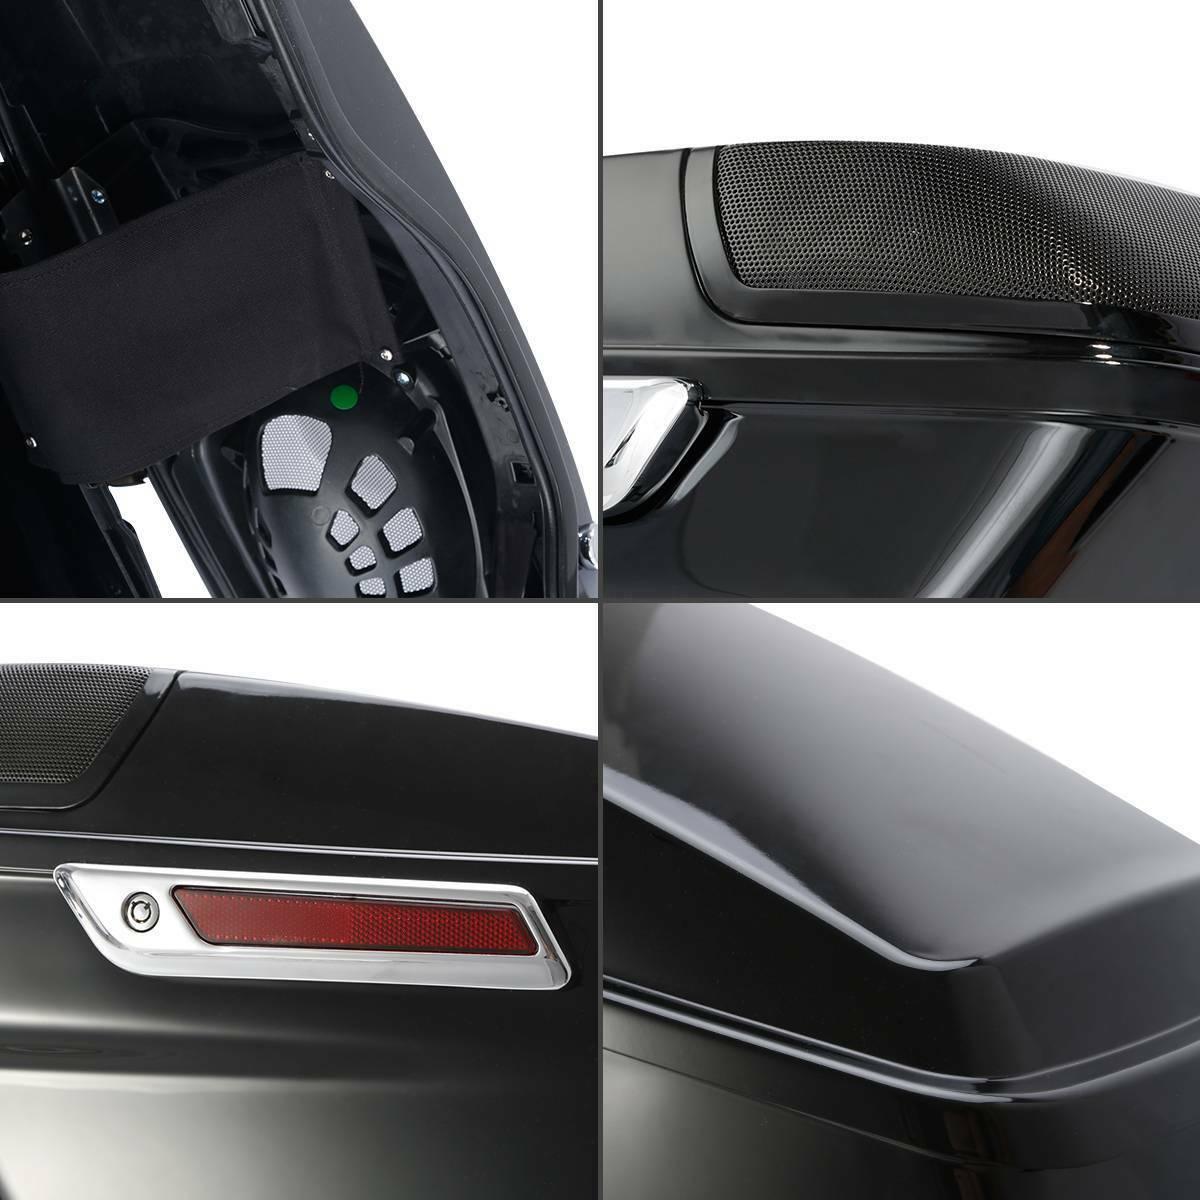 4" Extended Saddlebag Saddle bags Fit For Harley Road Street Glide 2014-2021 - Moto Life Products